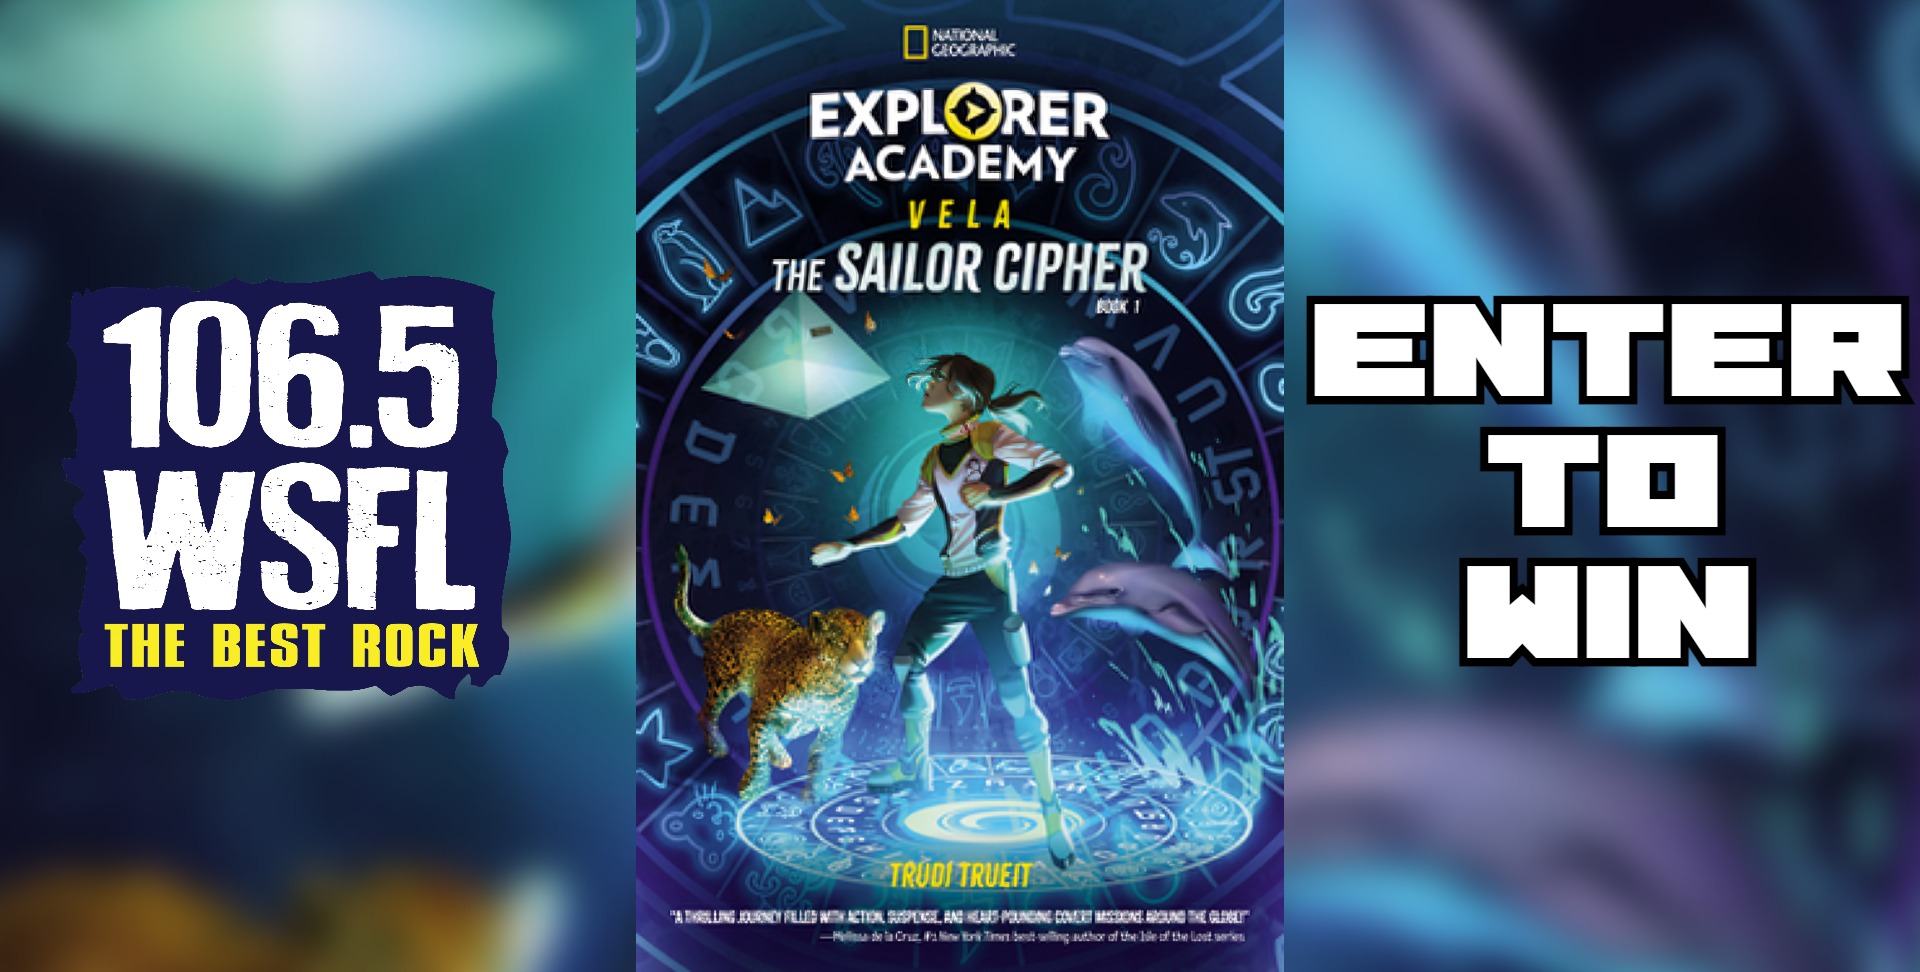 Score “Explorer Academy Vela: The Sailor Cipher” (Book 1) from National Geographic Kids